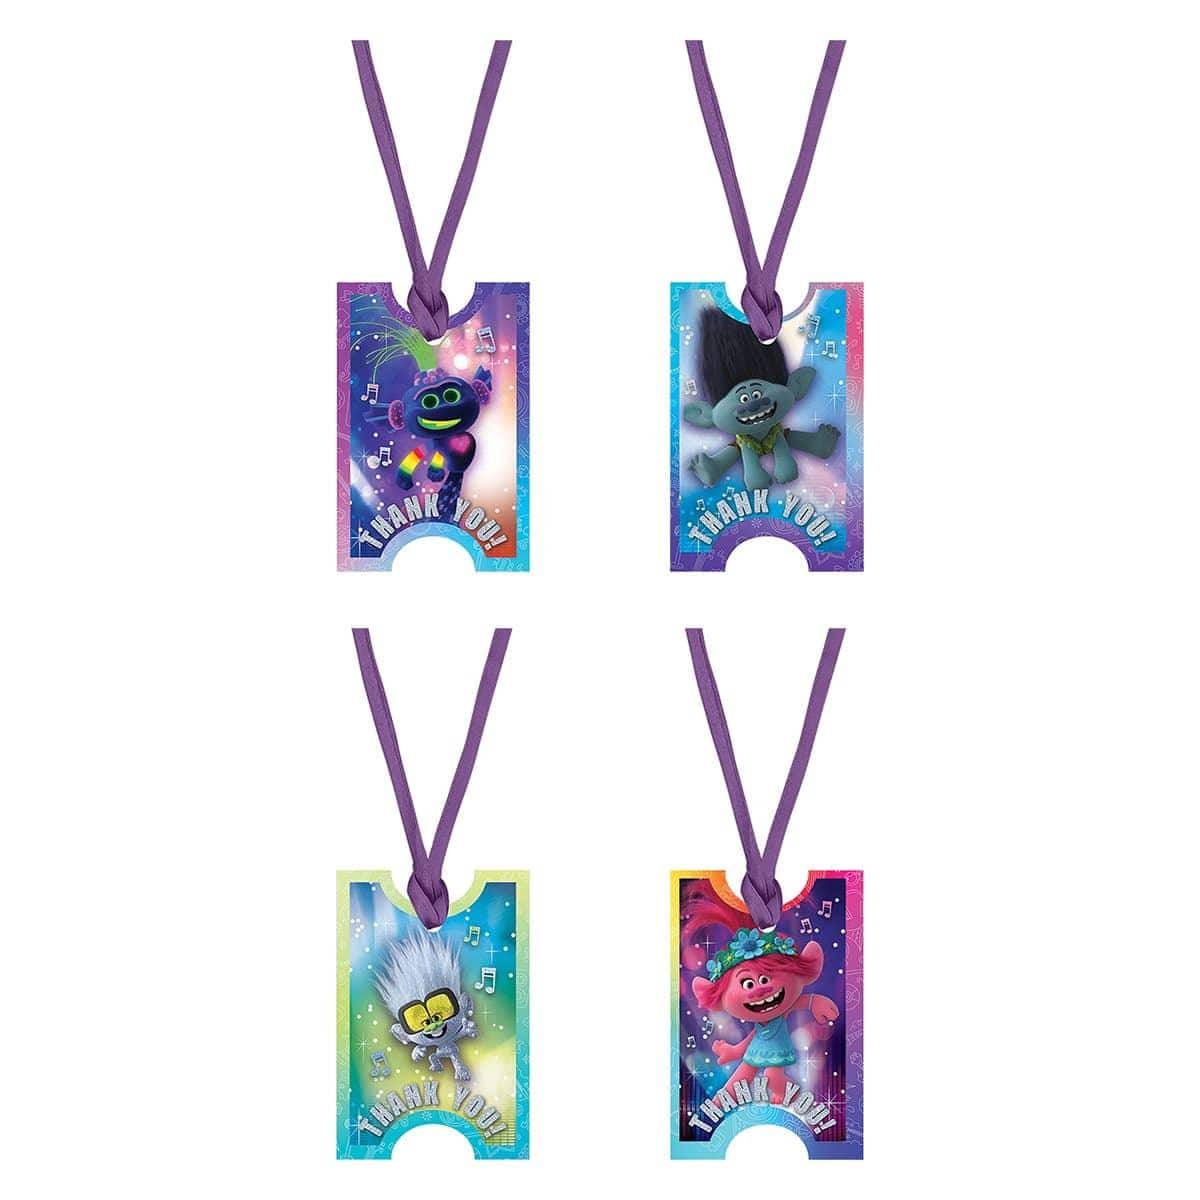 Buy Kids Birthday Trolls World Tour Thank You tags, 8 per package sold at Party Expert